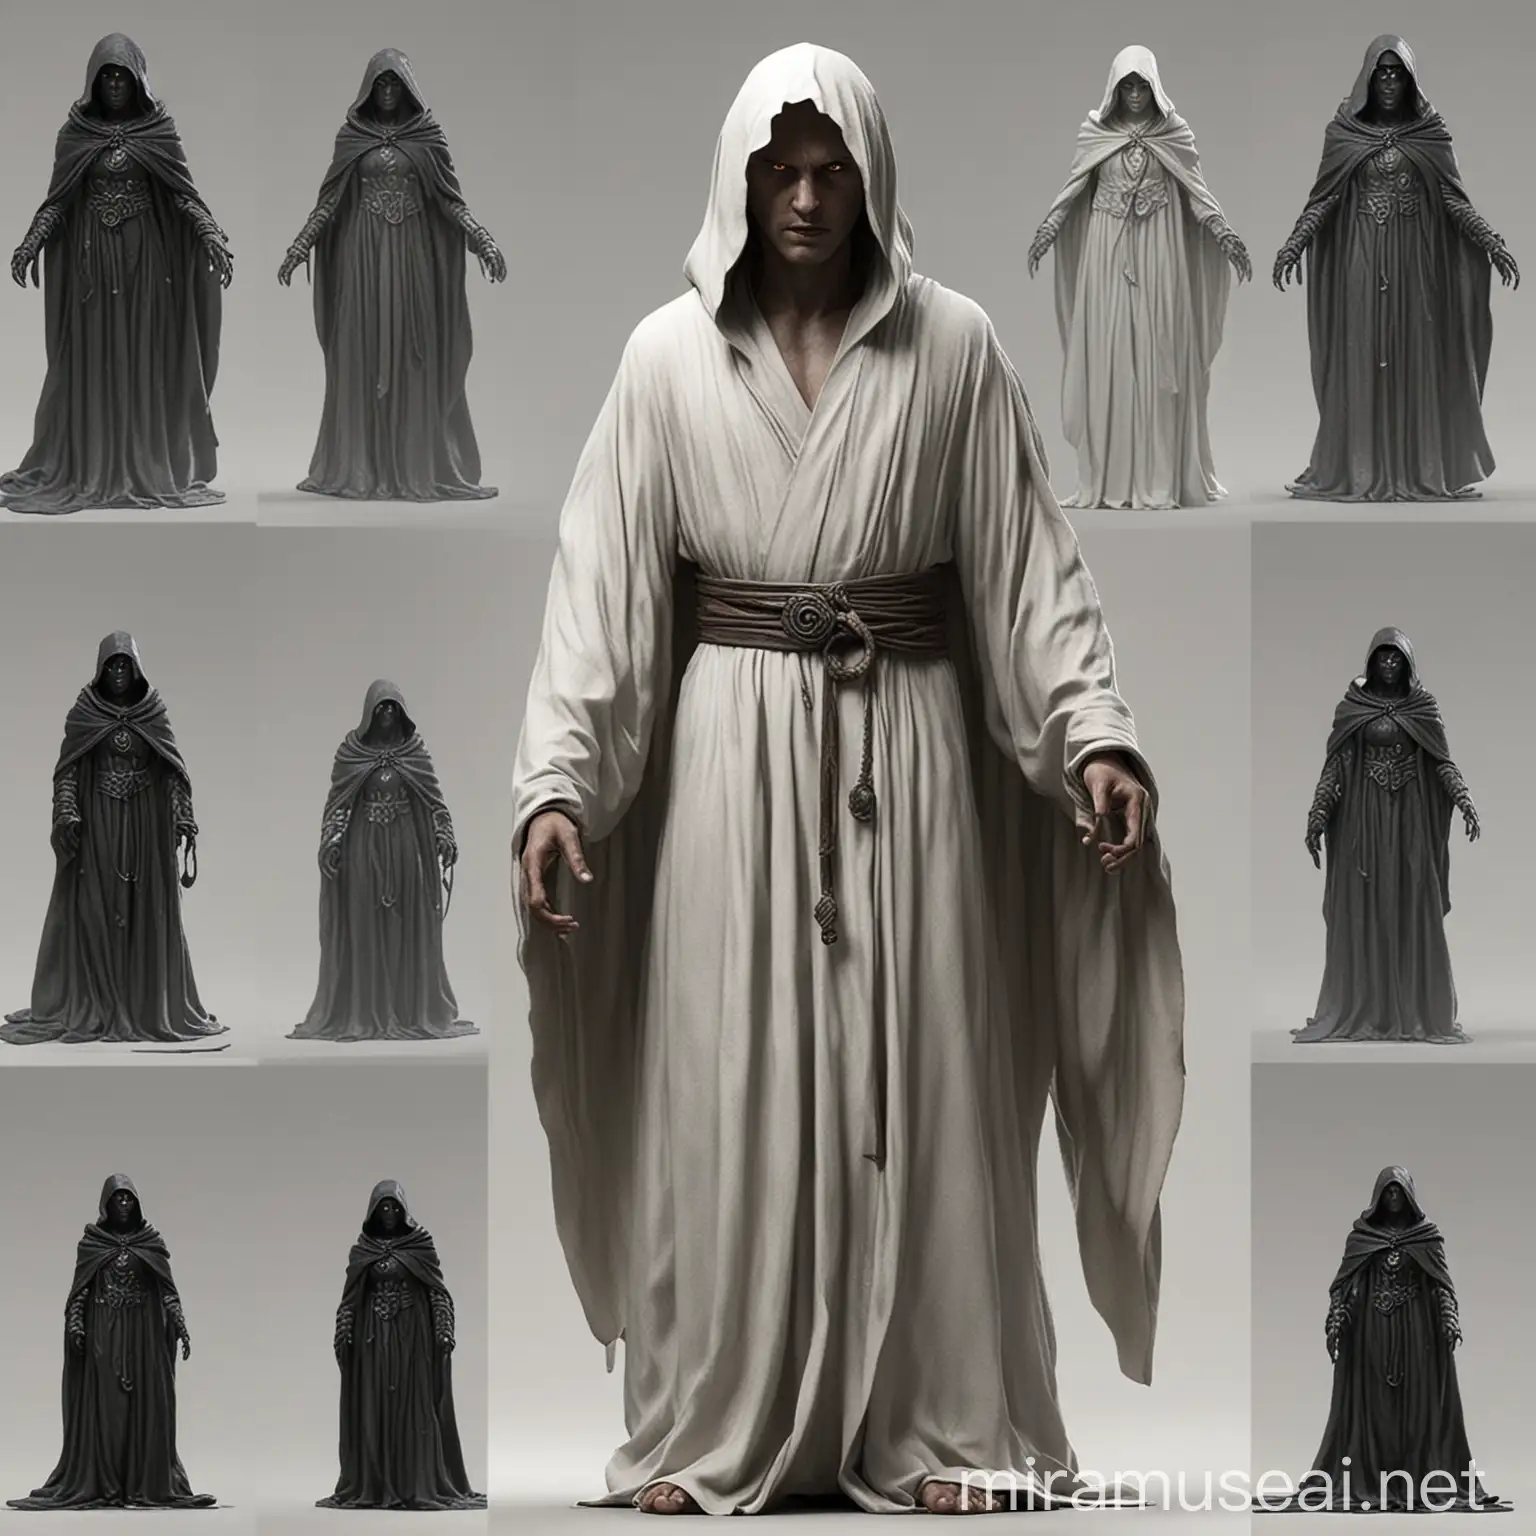 Mysterious Robed Figure in Fantasy Setting